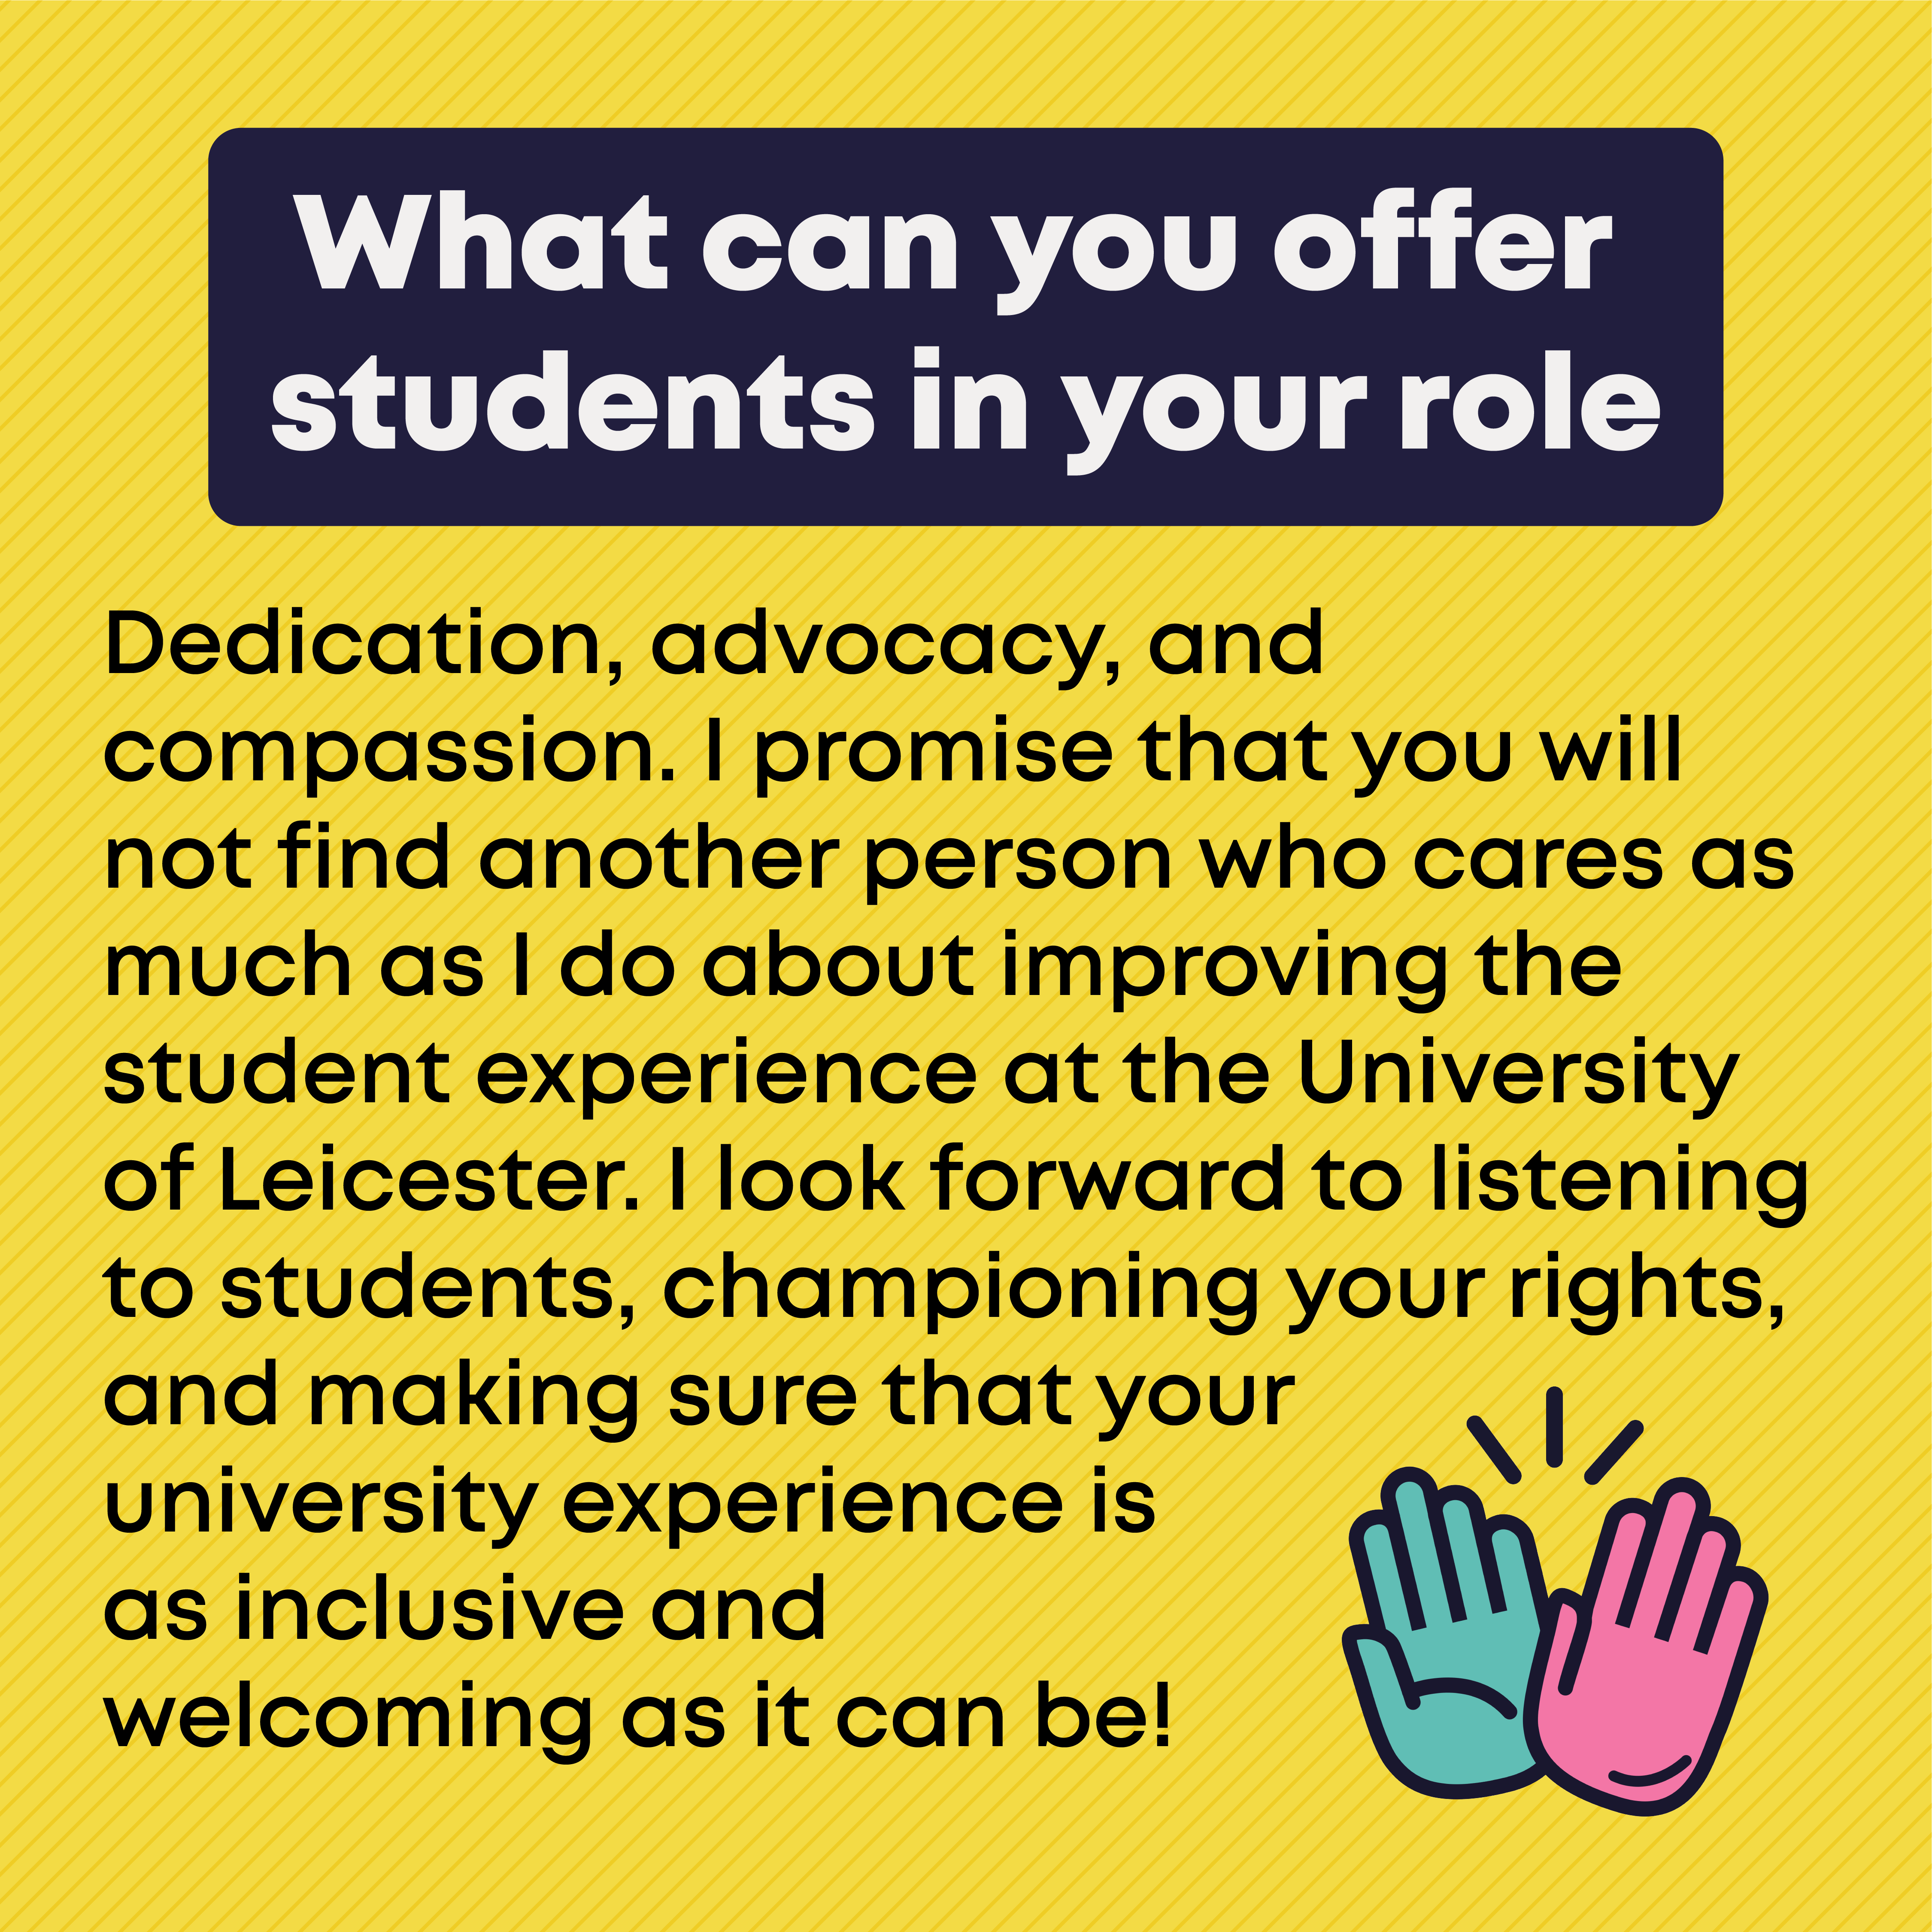 3.	What can you offer students in your role?  Dedication, advocacy, and compassion. I promise that you will not find another person who cares as much as I do about improving the student experience at the University of Leicester. I look forward to listening to students, championing your rights, and making sure that your university experience is as inclusive and welcoming as it can be! 